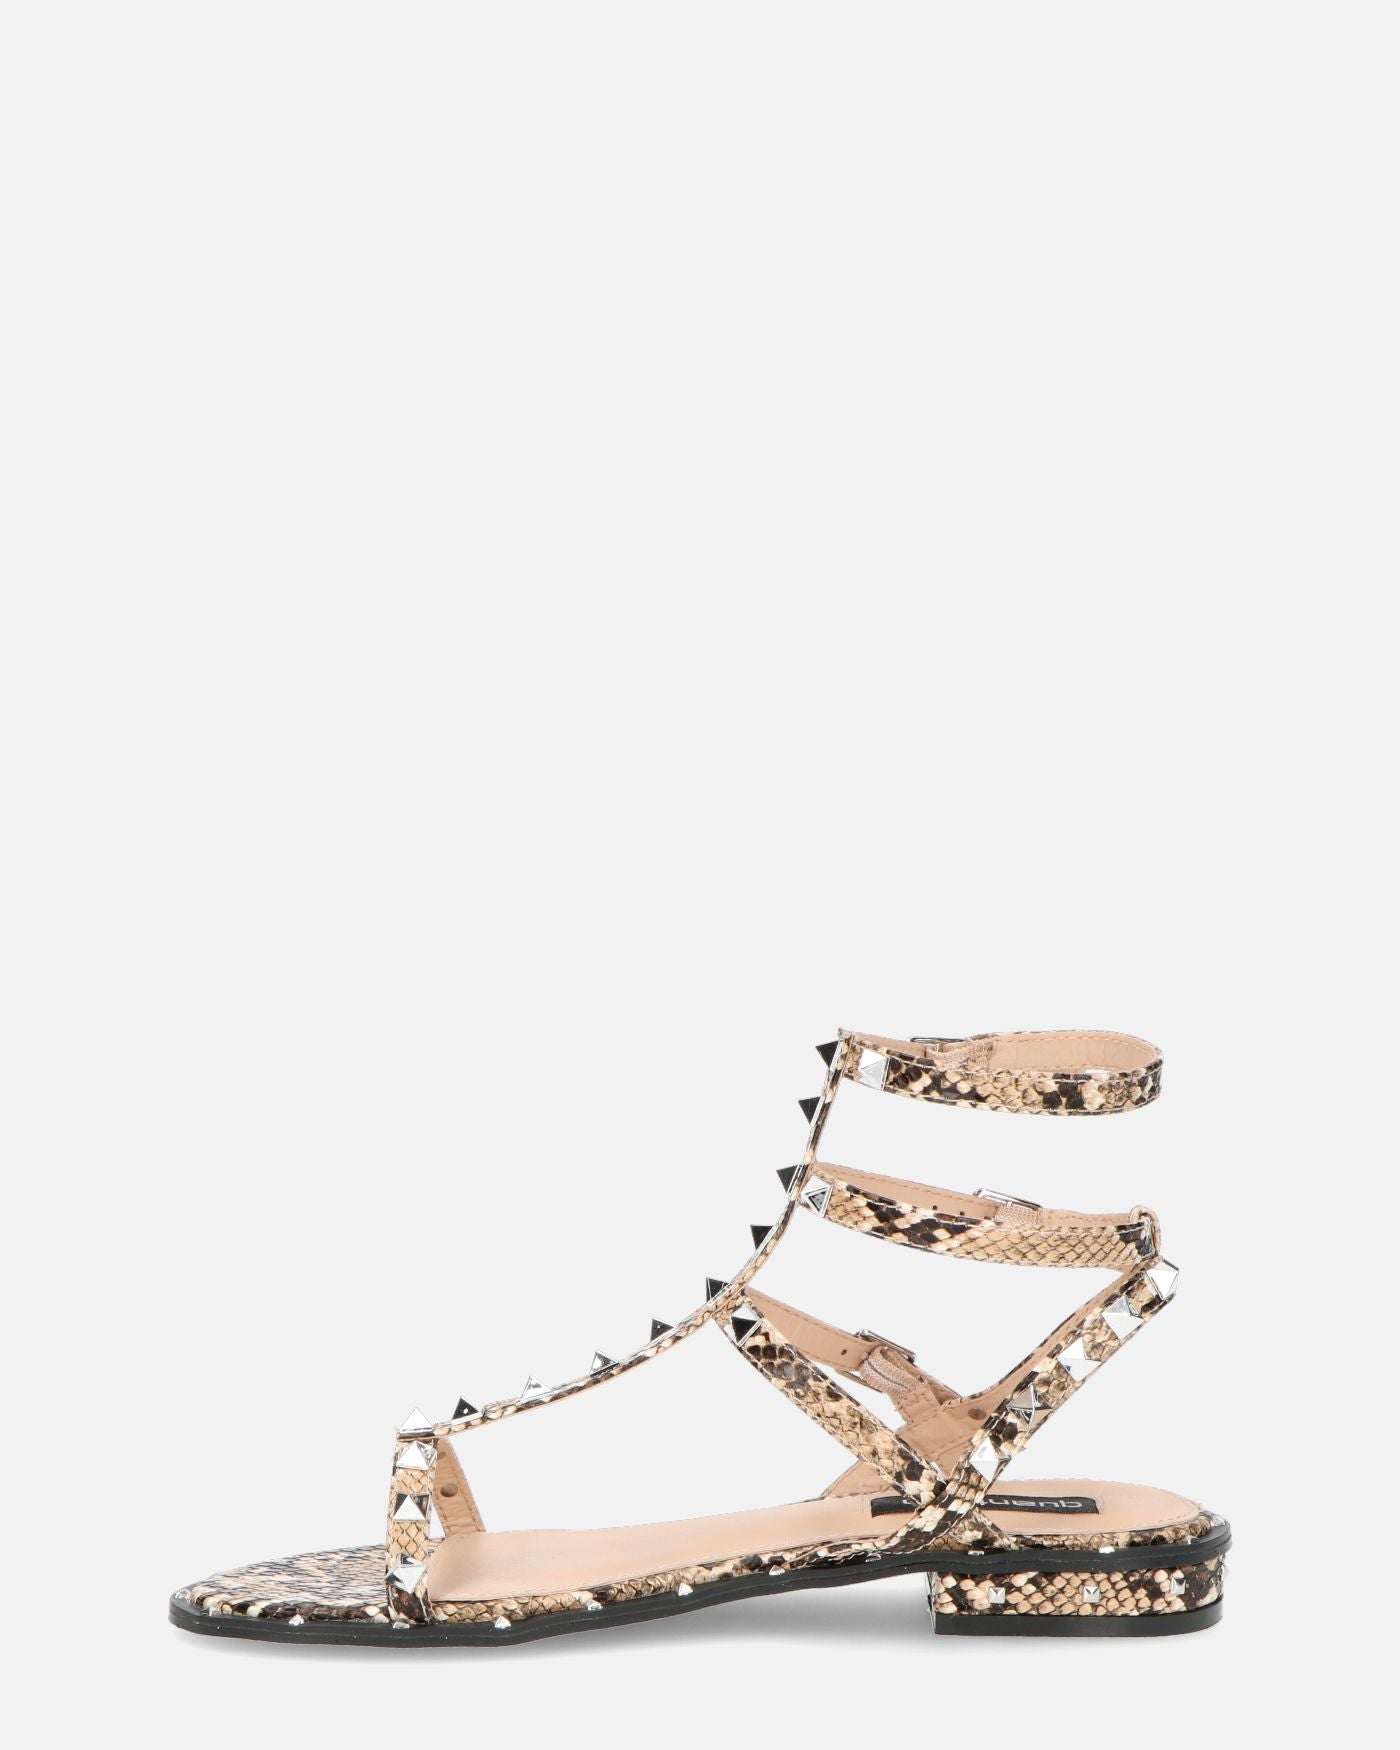 KENZA - beige snake print sandals with straps and studs